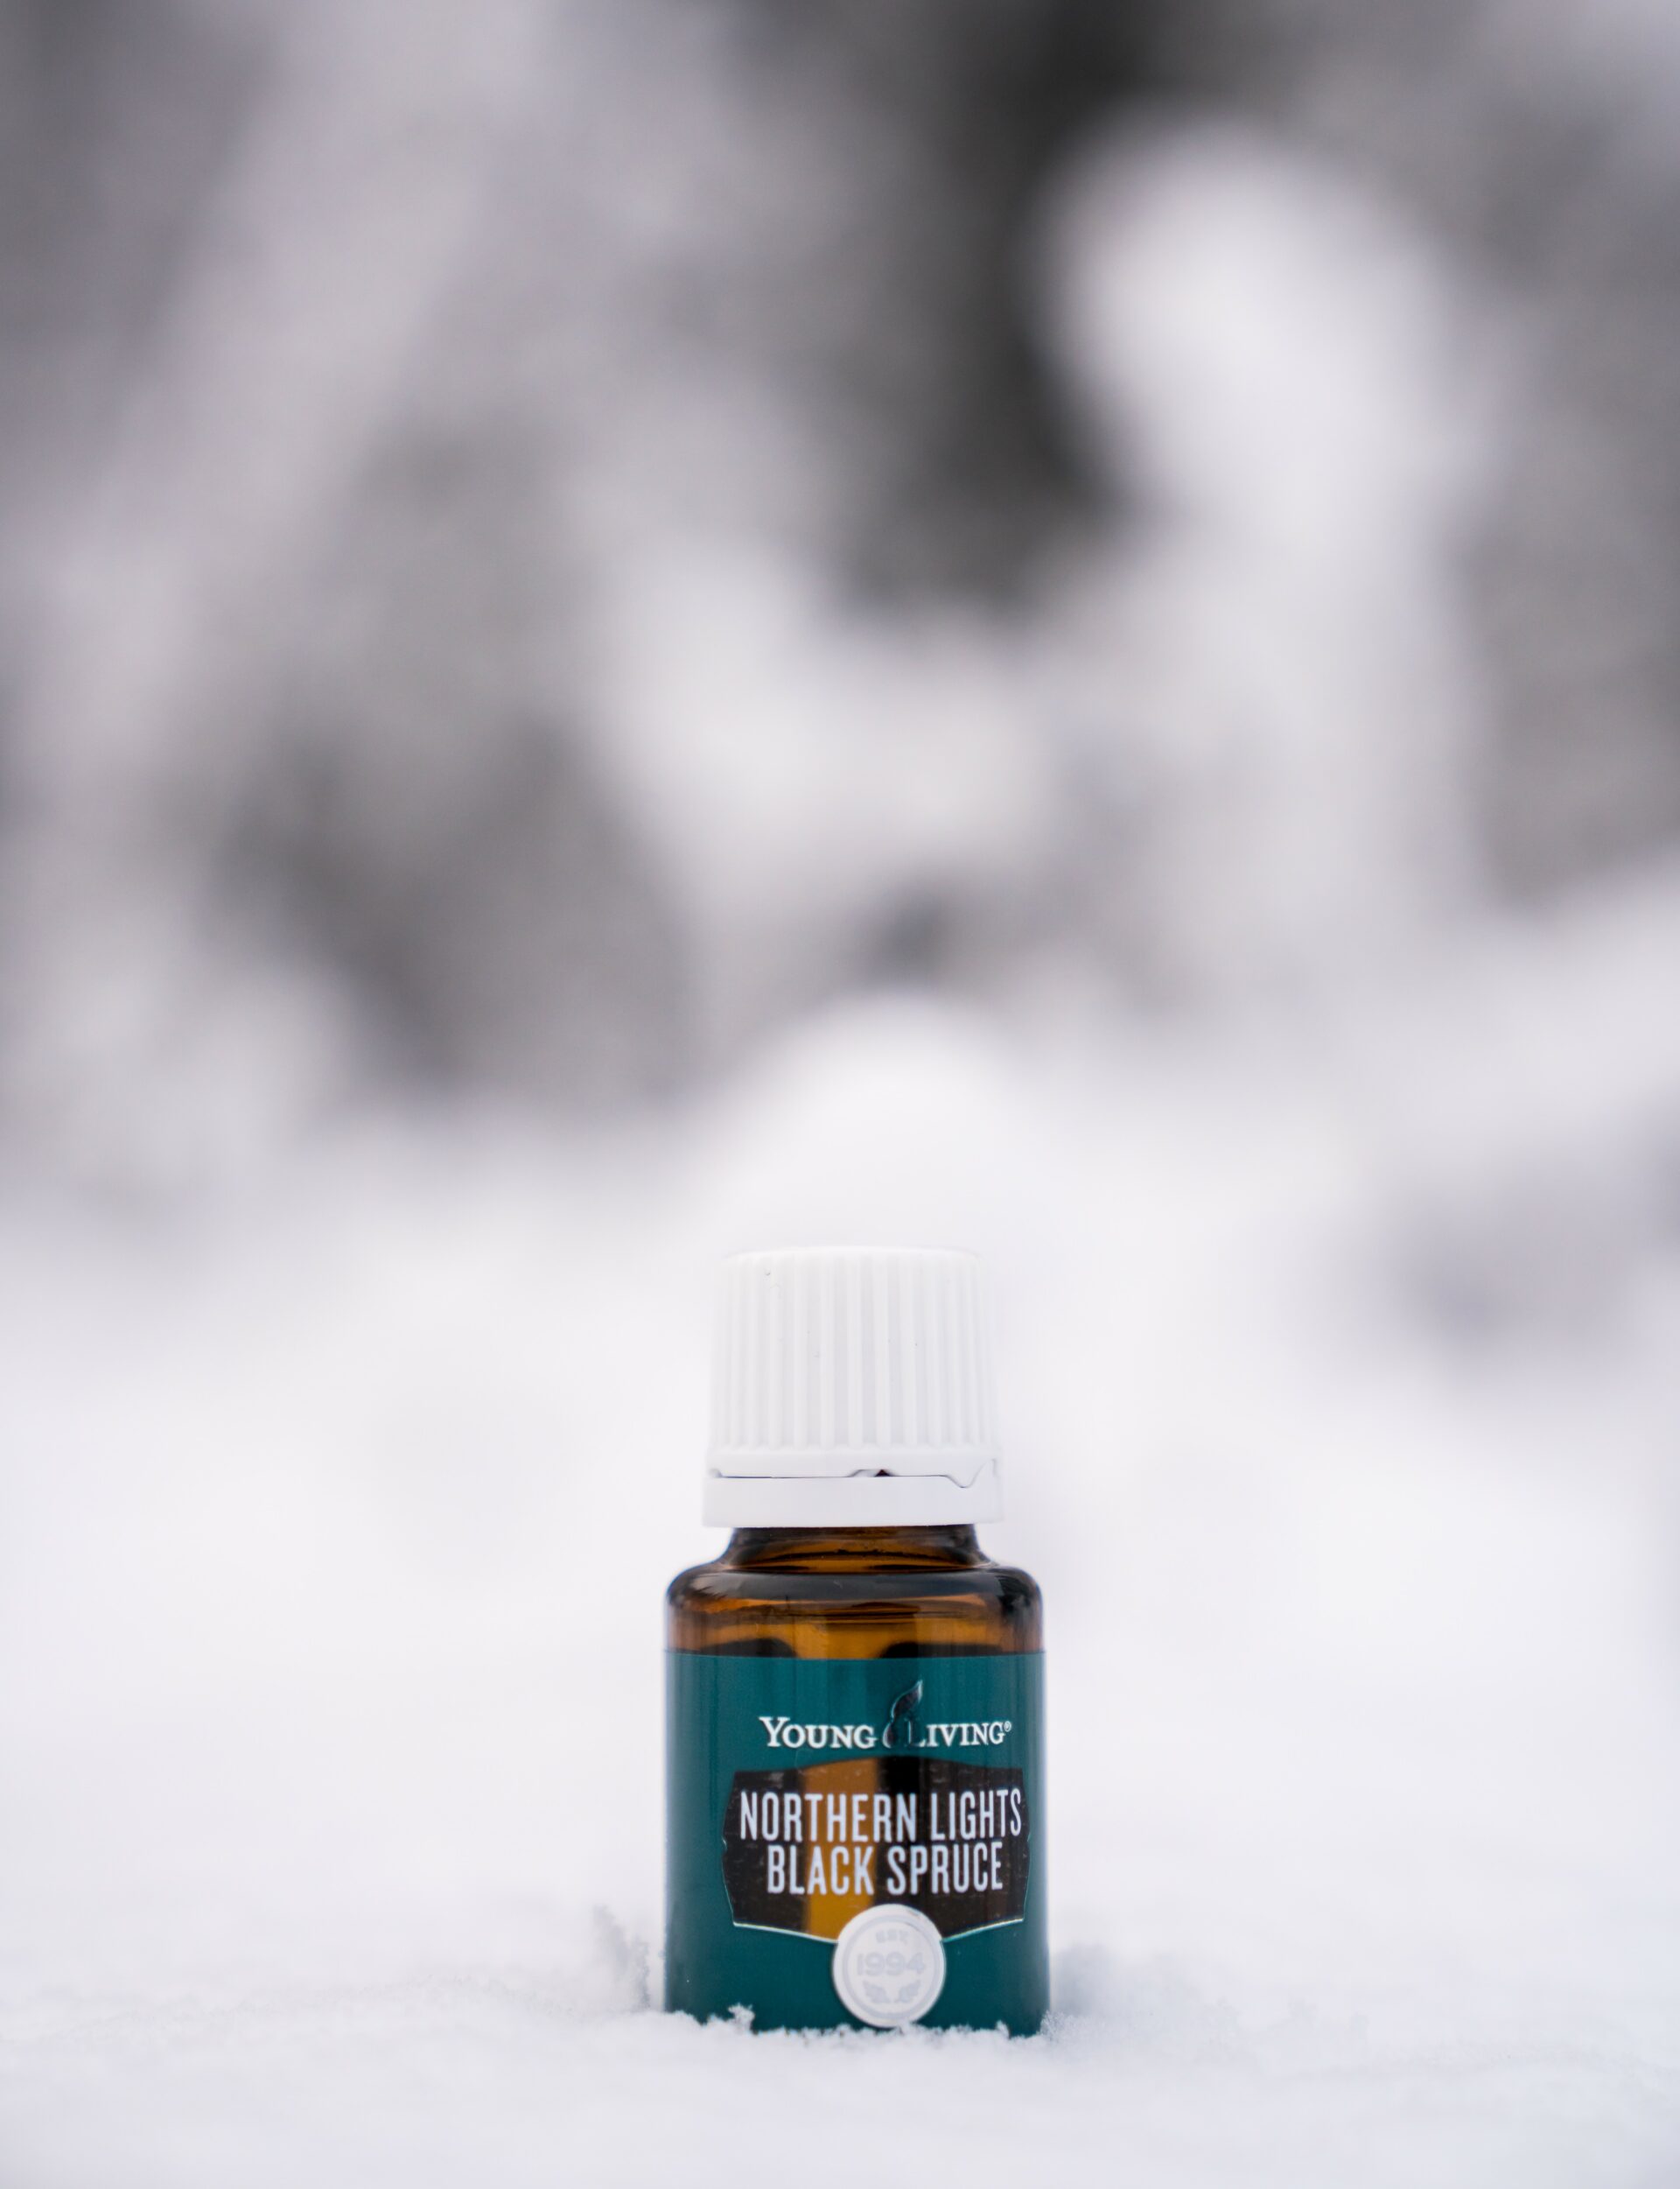 Northern Lights Black Spruce essential oil sitting in the snow- Young Living Lavender Life Blog 